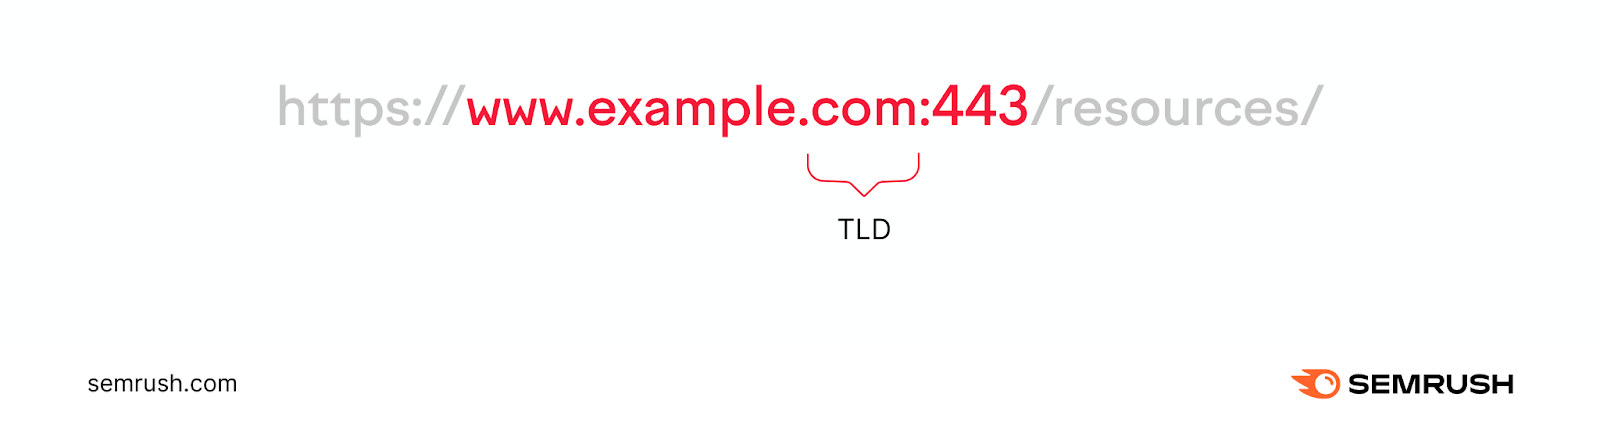 An URL with ".com" part marked as "TLD"